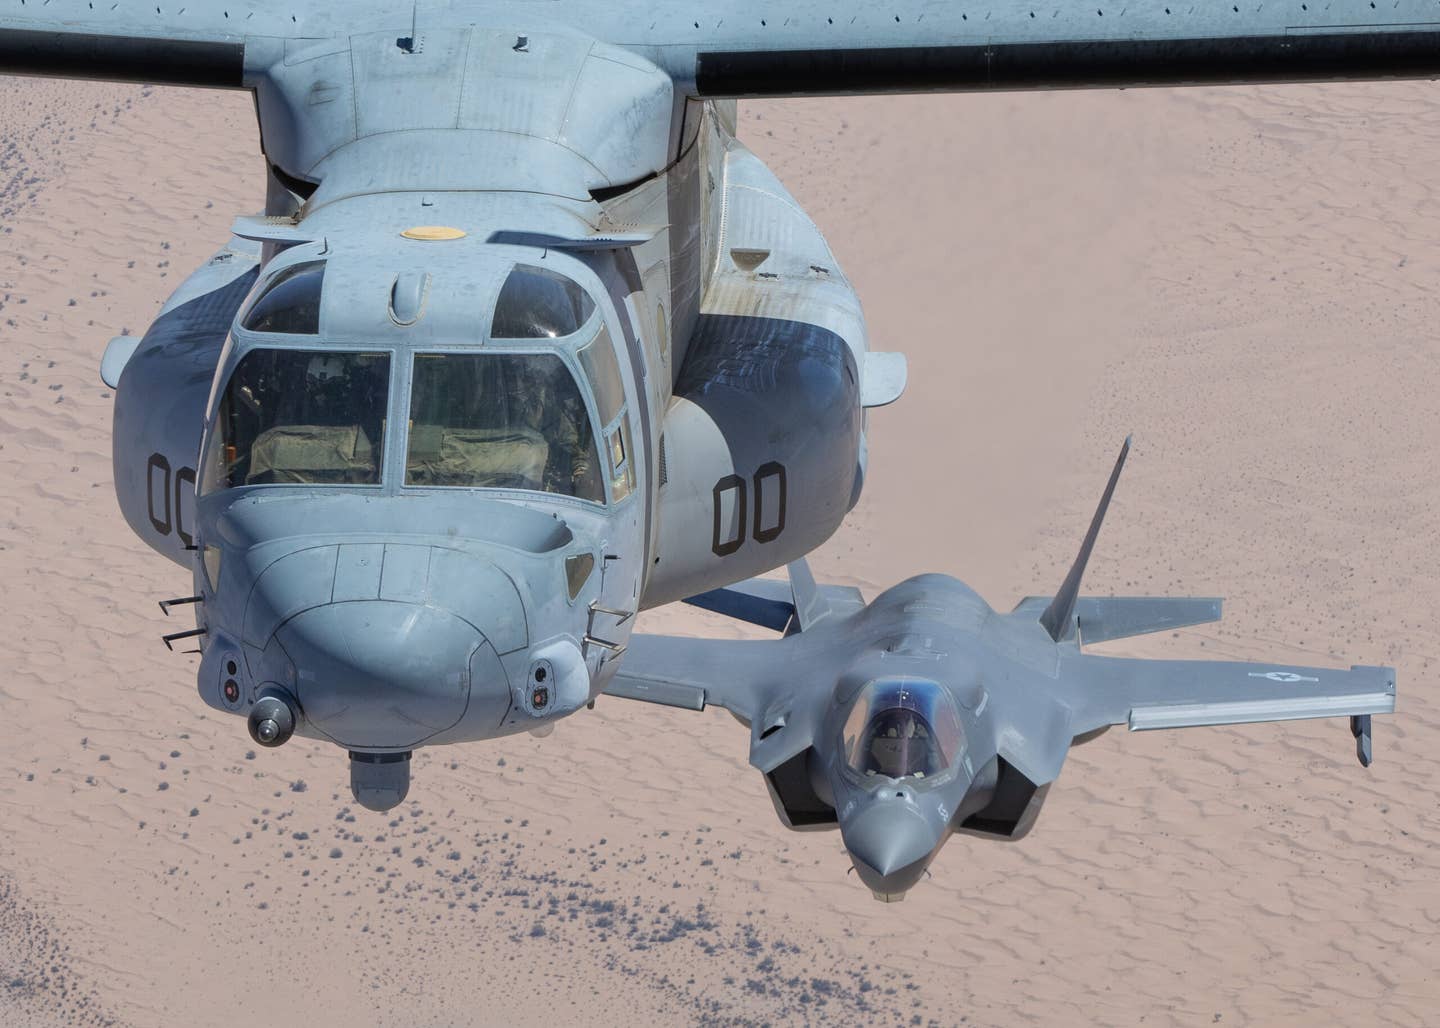 VMX-1 MV-22 and F-35B fly together over the Arizona desert. (Author's image)